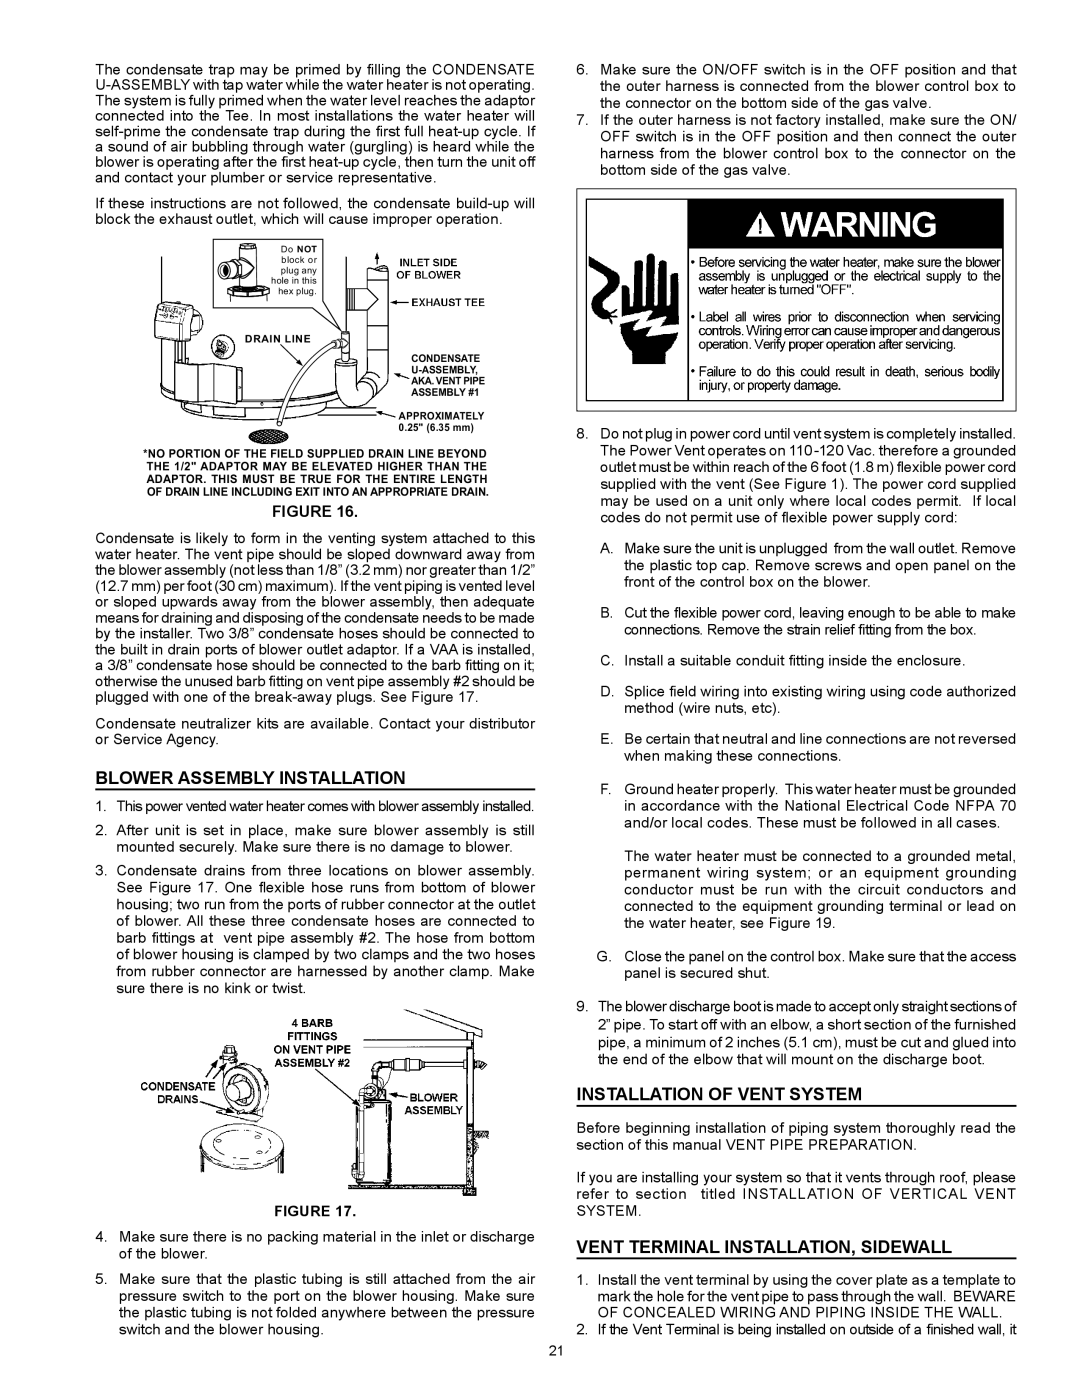 American Water Heater American Water Heaters Residential Gas Water Heater instruction manual Blower Assembly Installation 